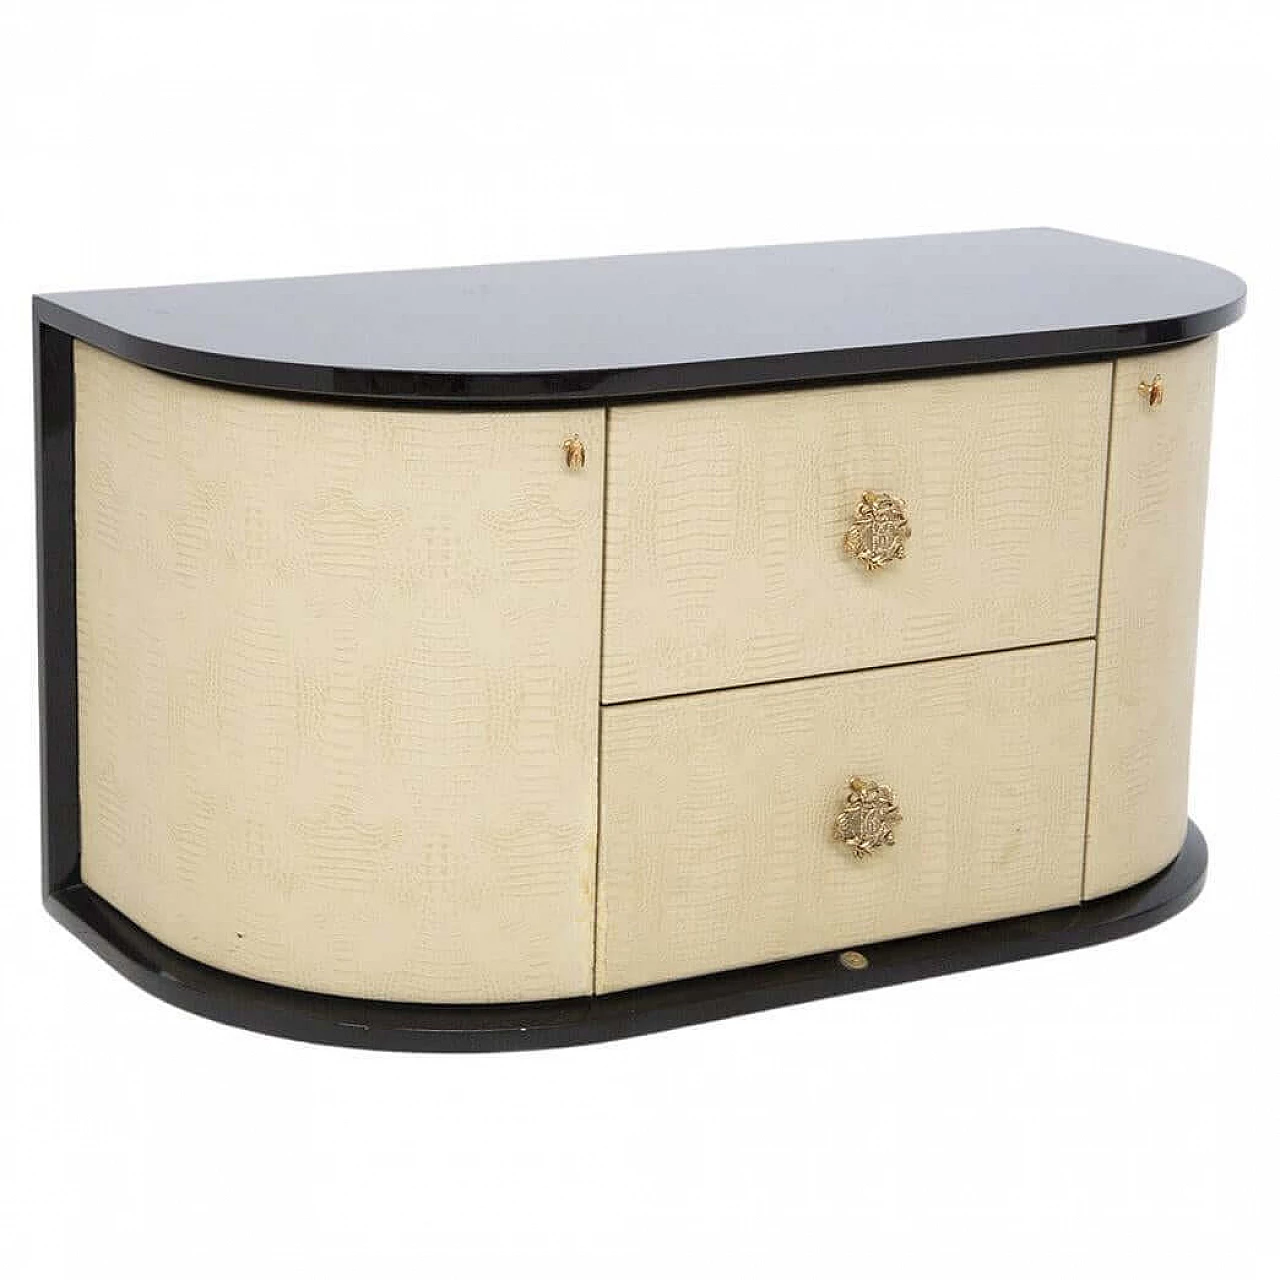 Roberto Cavalli chest of drawers in imitation reptile skin, 1990s 1466228